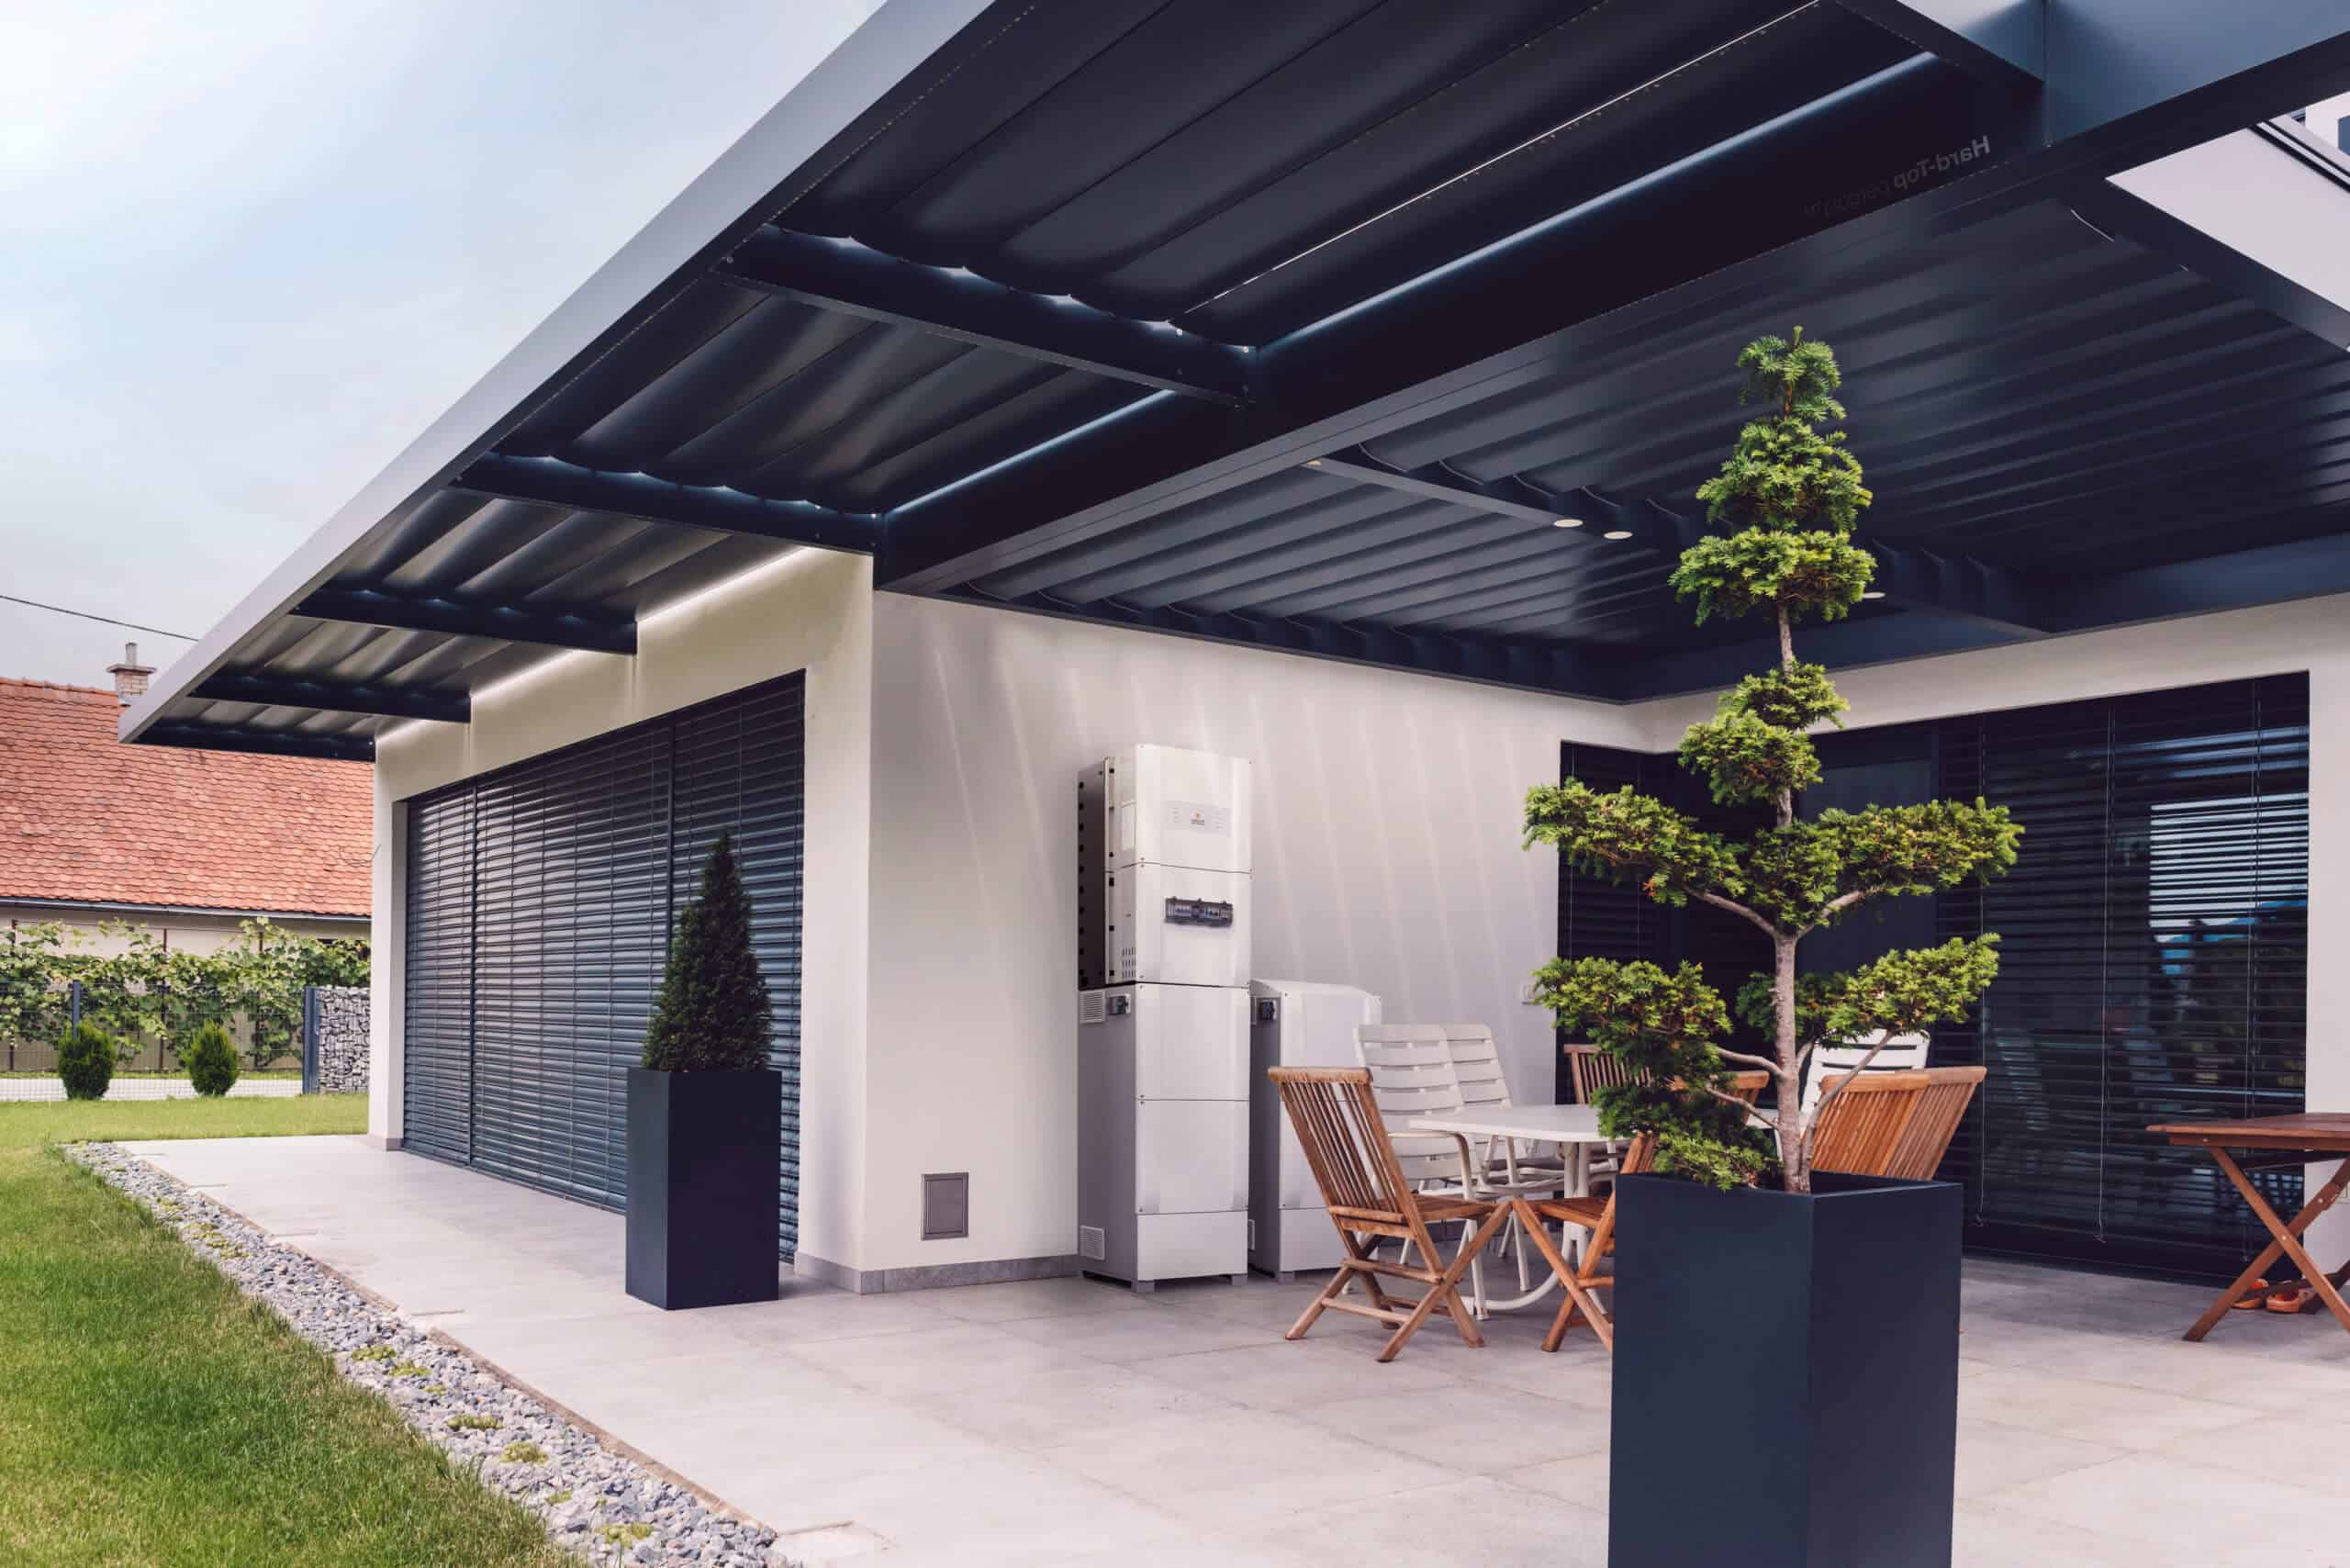 A modern home alfresco dining area with solar equipment.